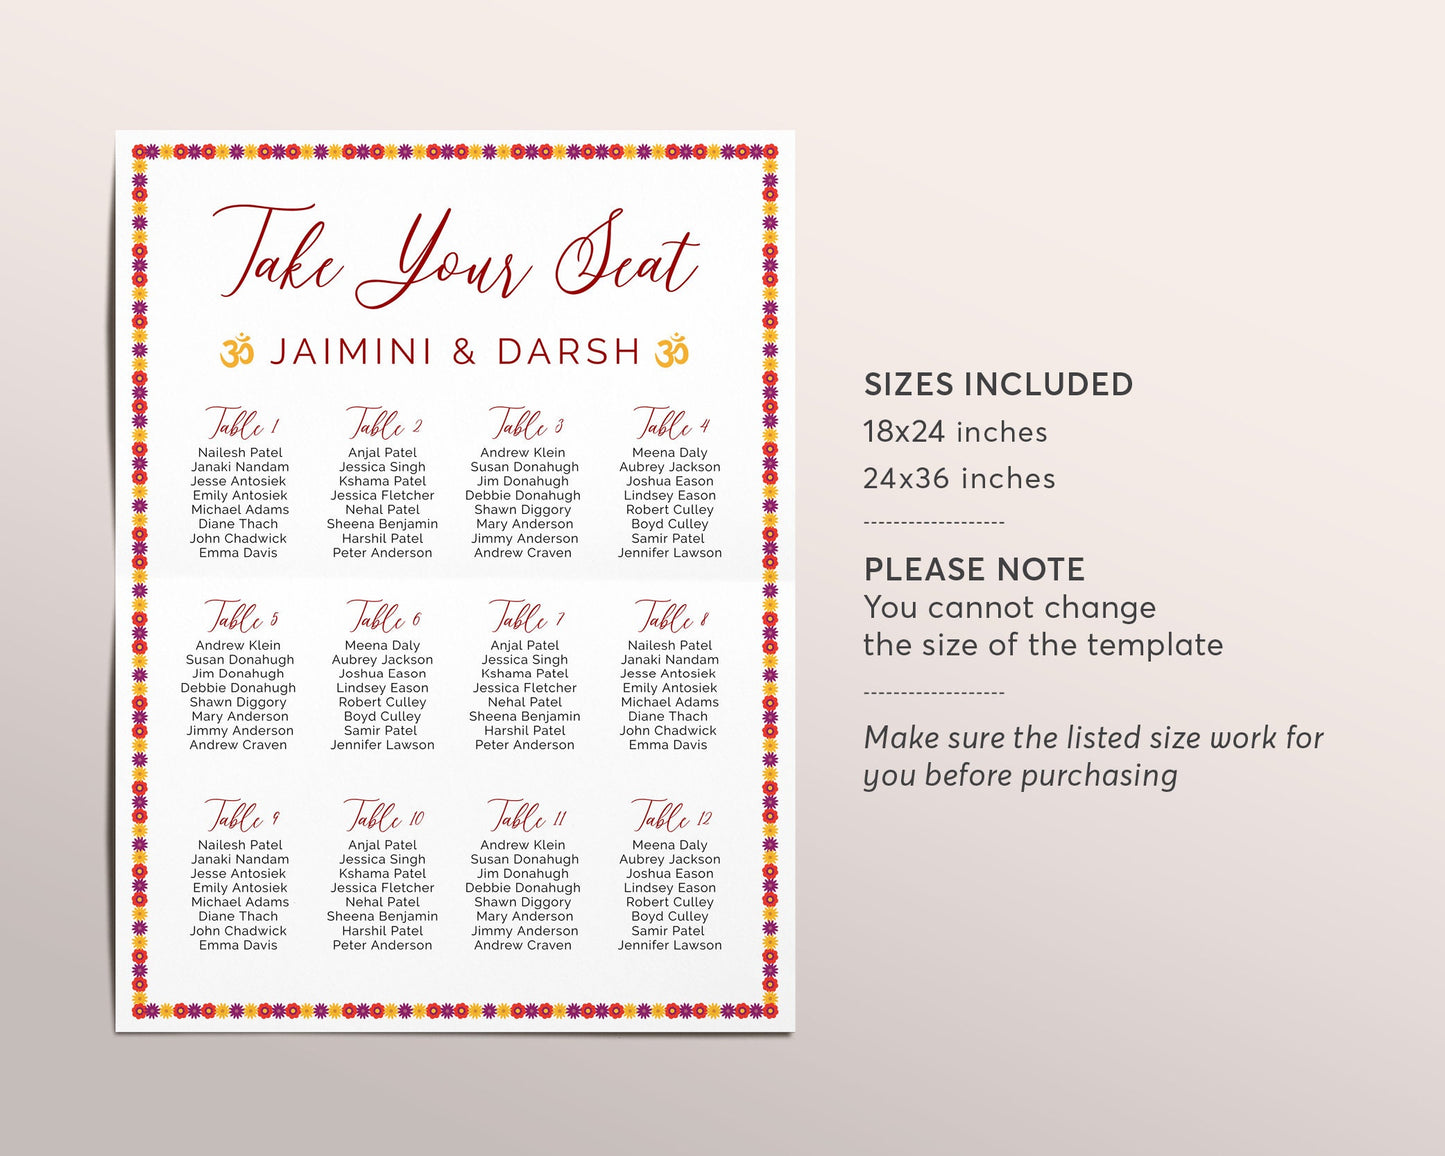 Editable Indian Wedding Seating Chart Template, Hindu DIY Table Seating, Find Your Table Wedding Sign, Custom Seating Plan, Rehearsal Dinner